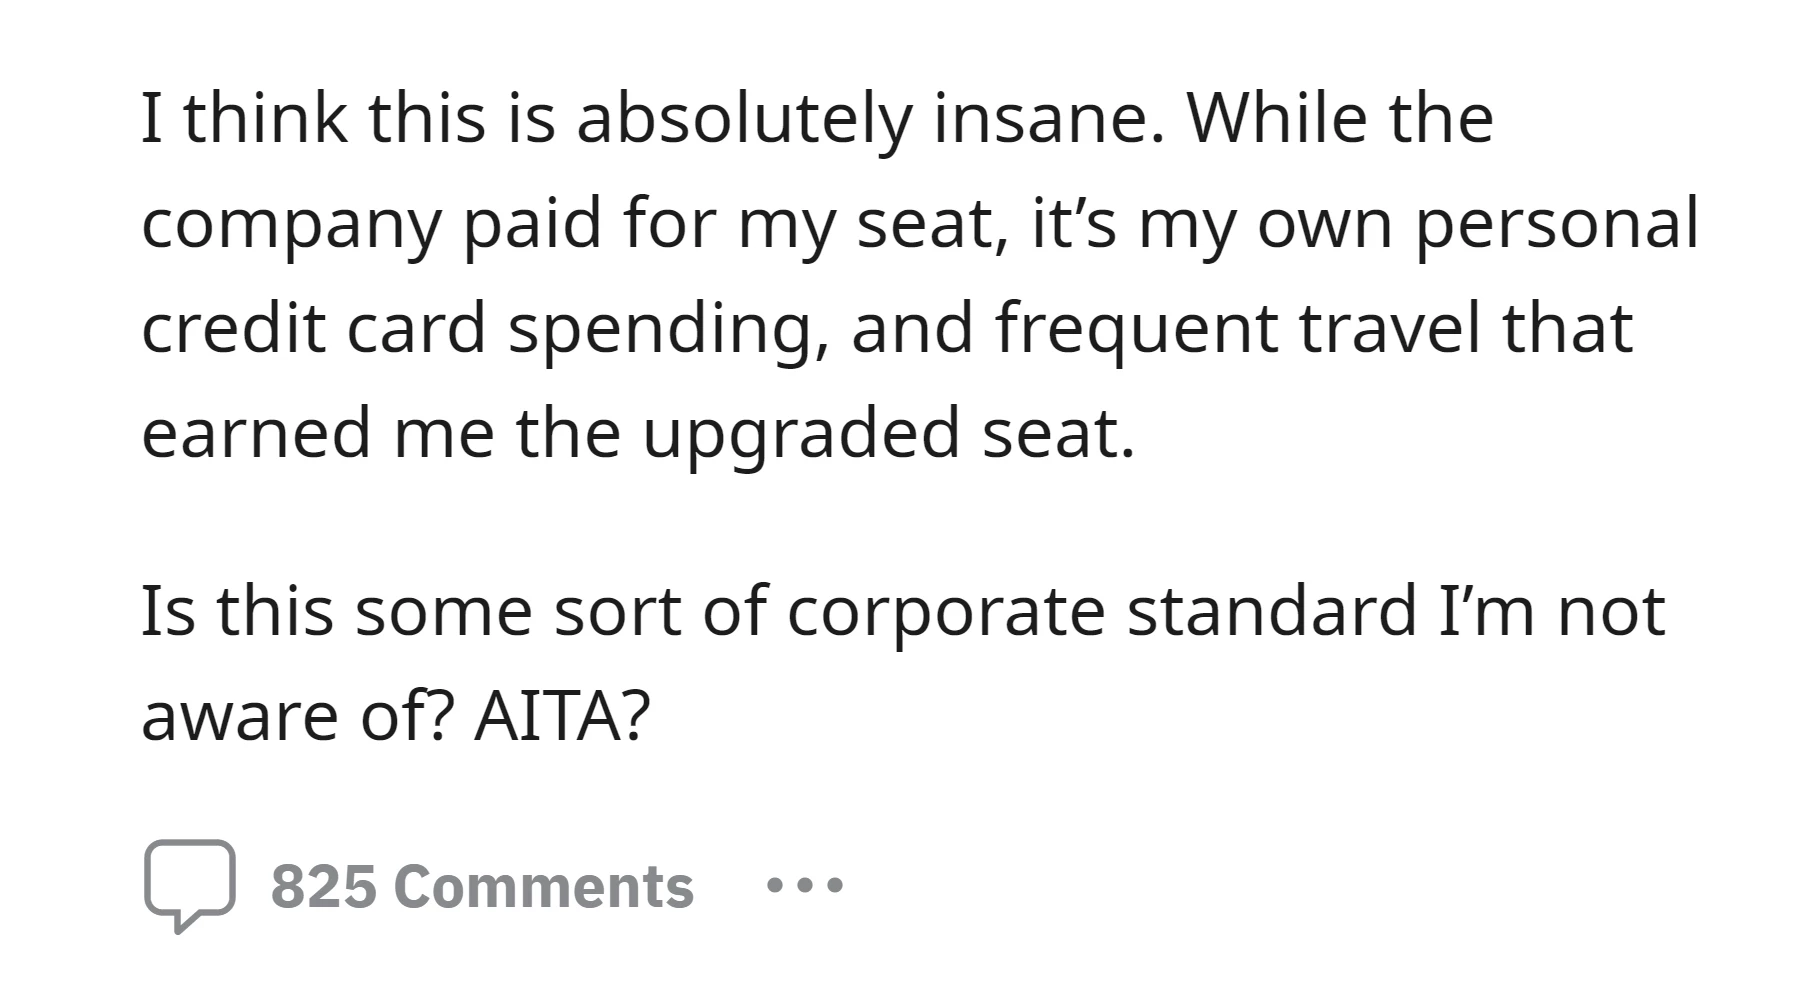 The OP finds it unreasonable as the upgrade was a result of their personal credit card spending and frequent travel